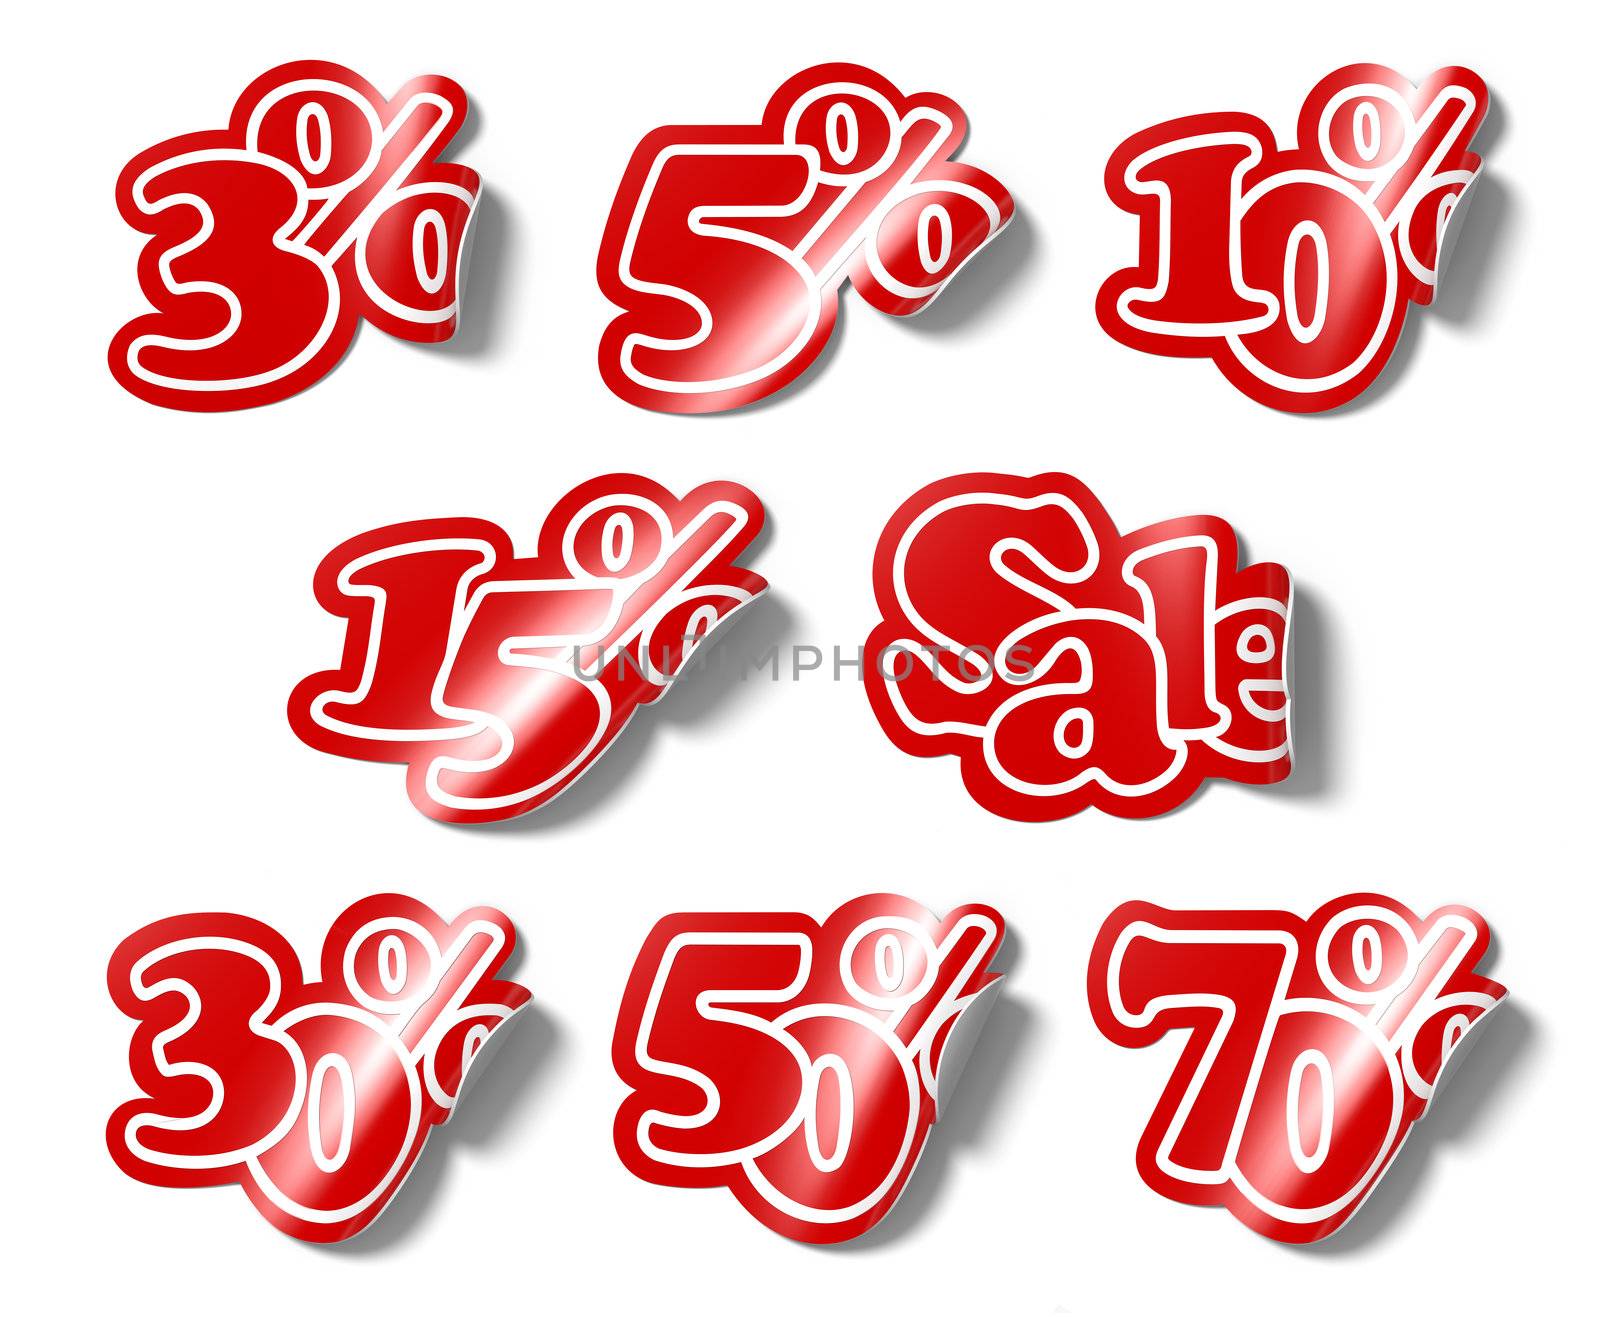 A 3d illustration set template of various stickers percent for sale.